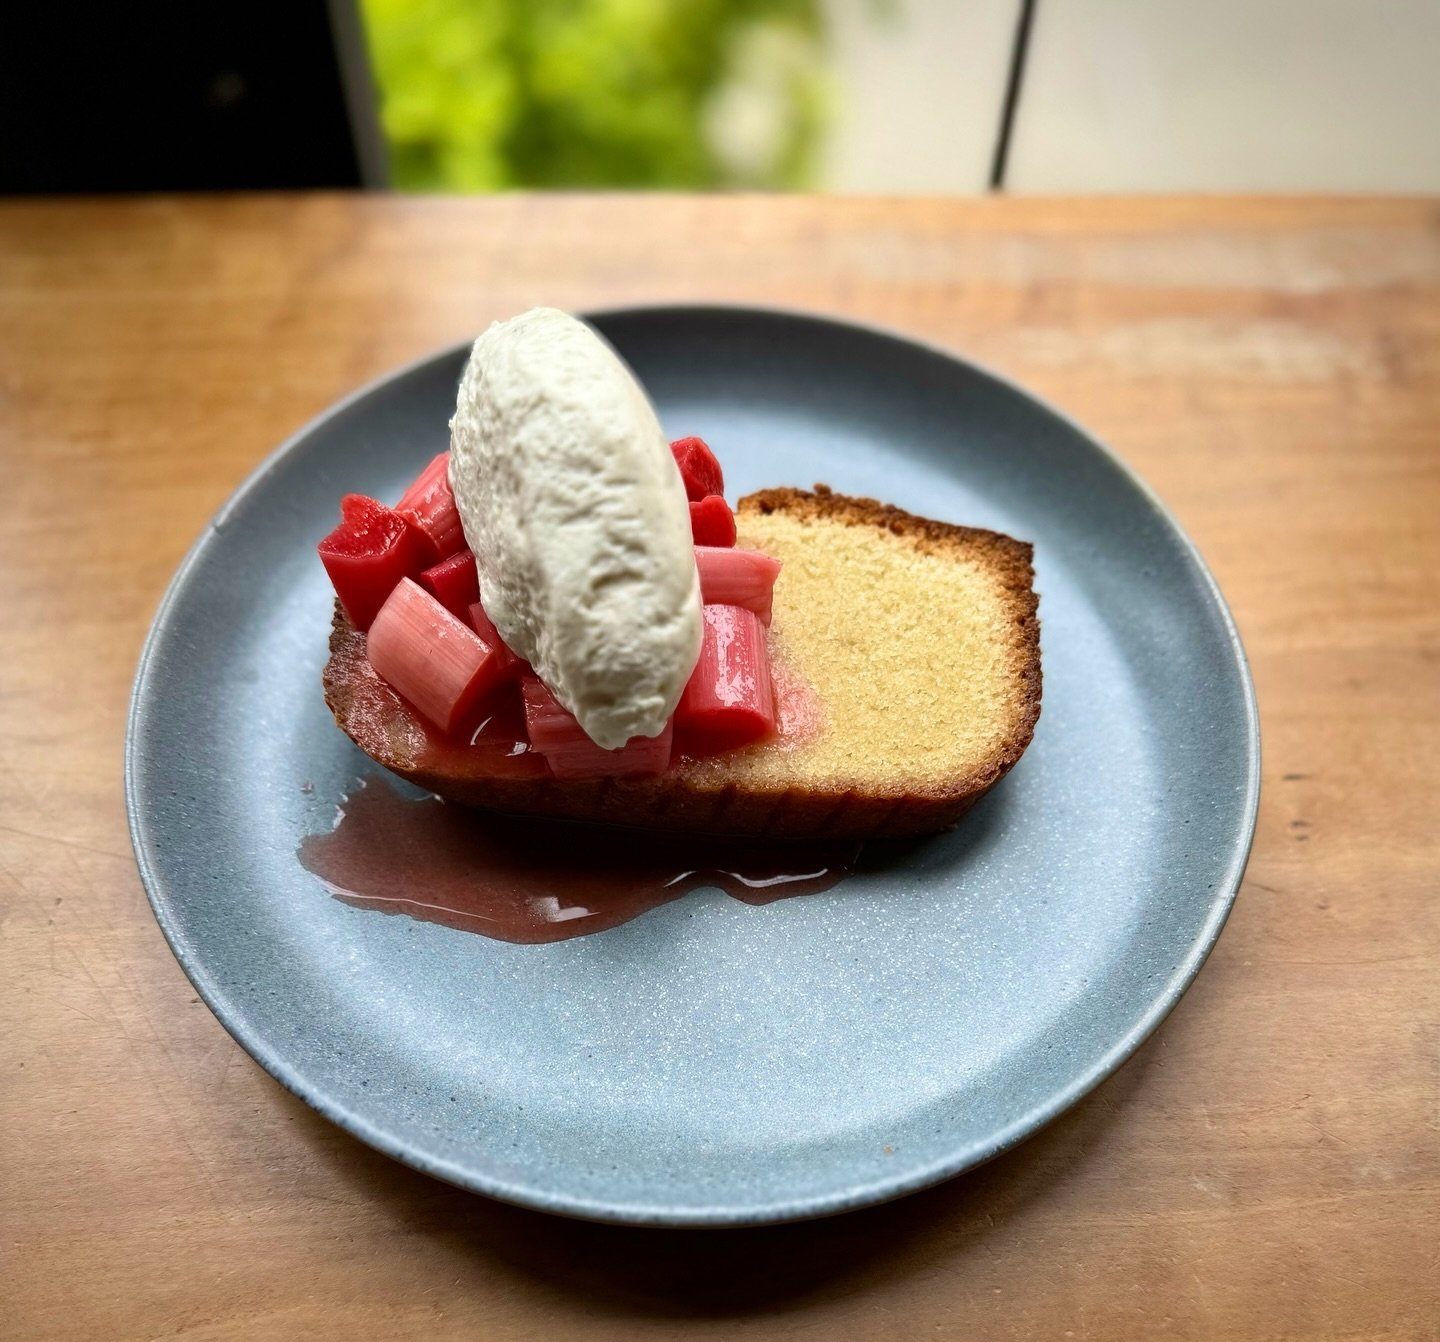 New spring dessert special - housemade pound cake, strawberry poached rhubarb, and vanilla whipped cream 🤗🍰🍓
.
.
.
.
.

#mamafox #cometomama #bedstuy #brooklyn #queerowned #womanowned #restaurant #dinner #happyhour #seasonalmenu #springspecials #d